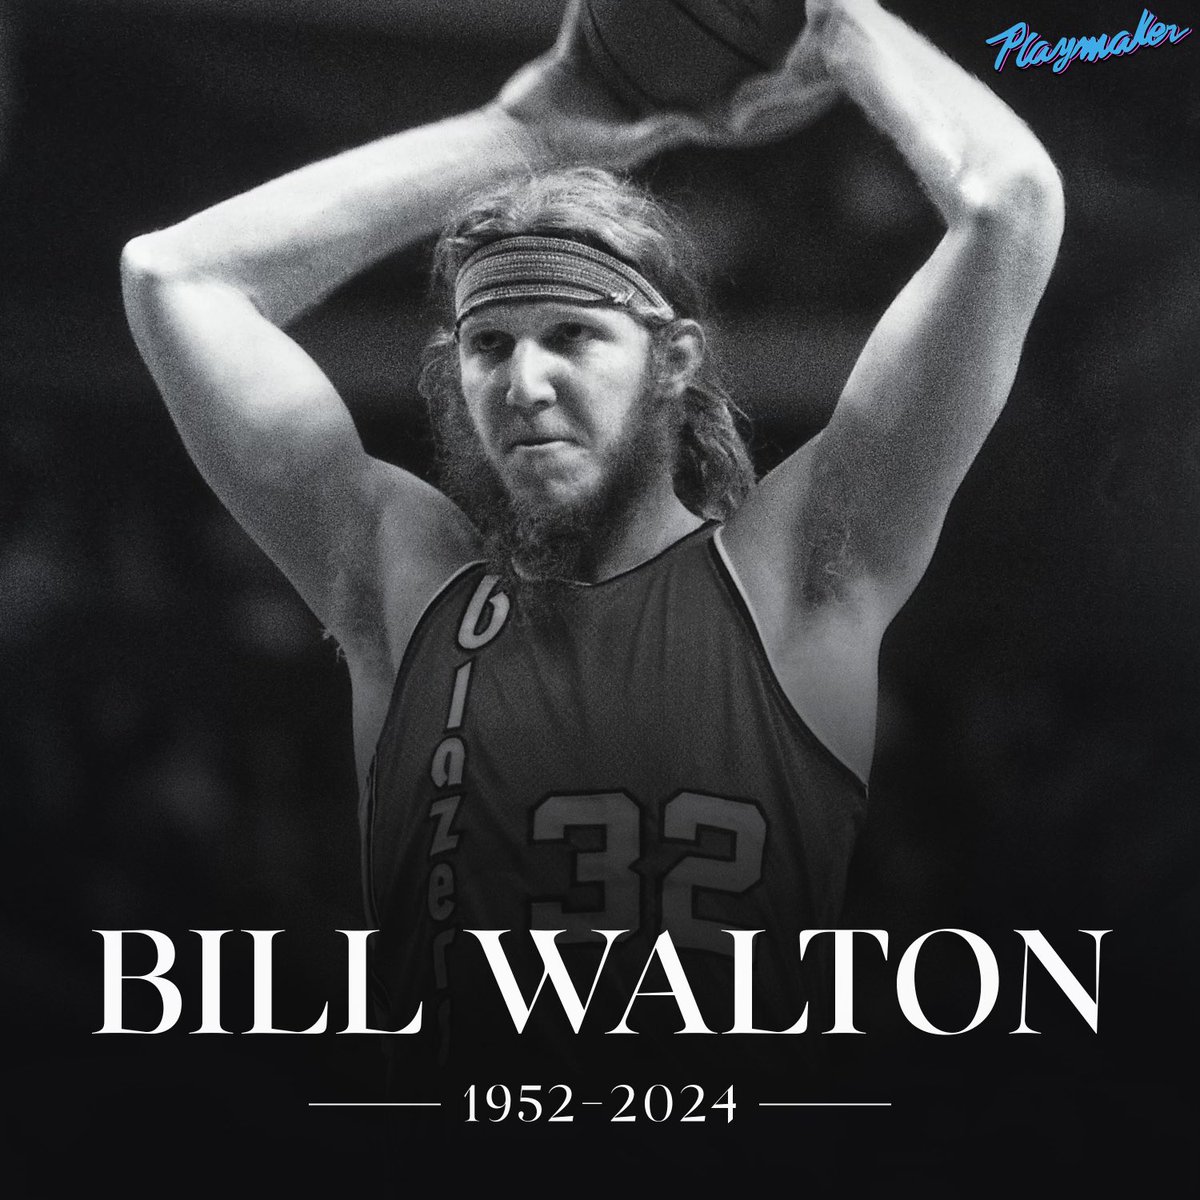 Hall of Fame center Bill Walton has passed away at 71 after a battle with cancer. RIP 🕊️🙏